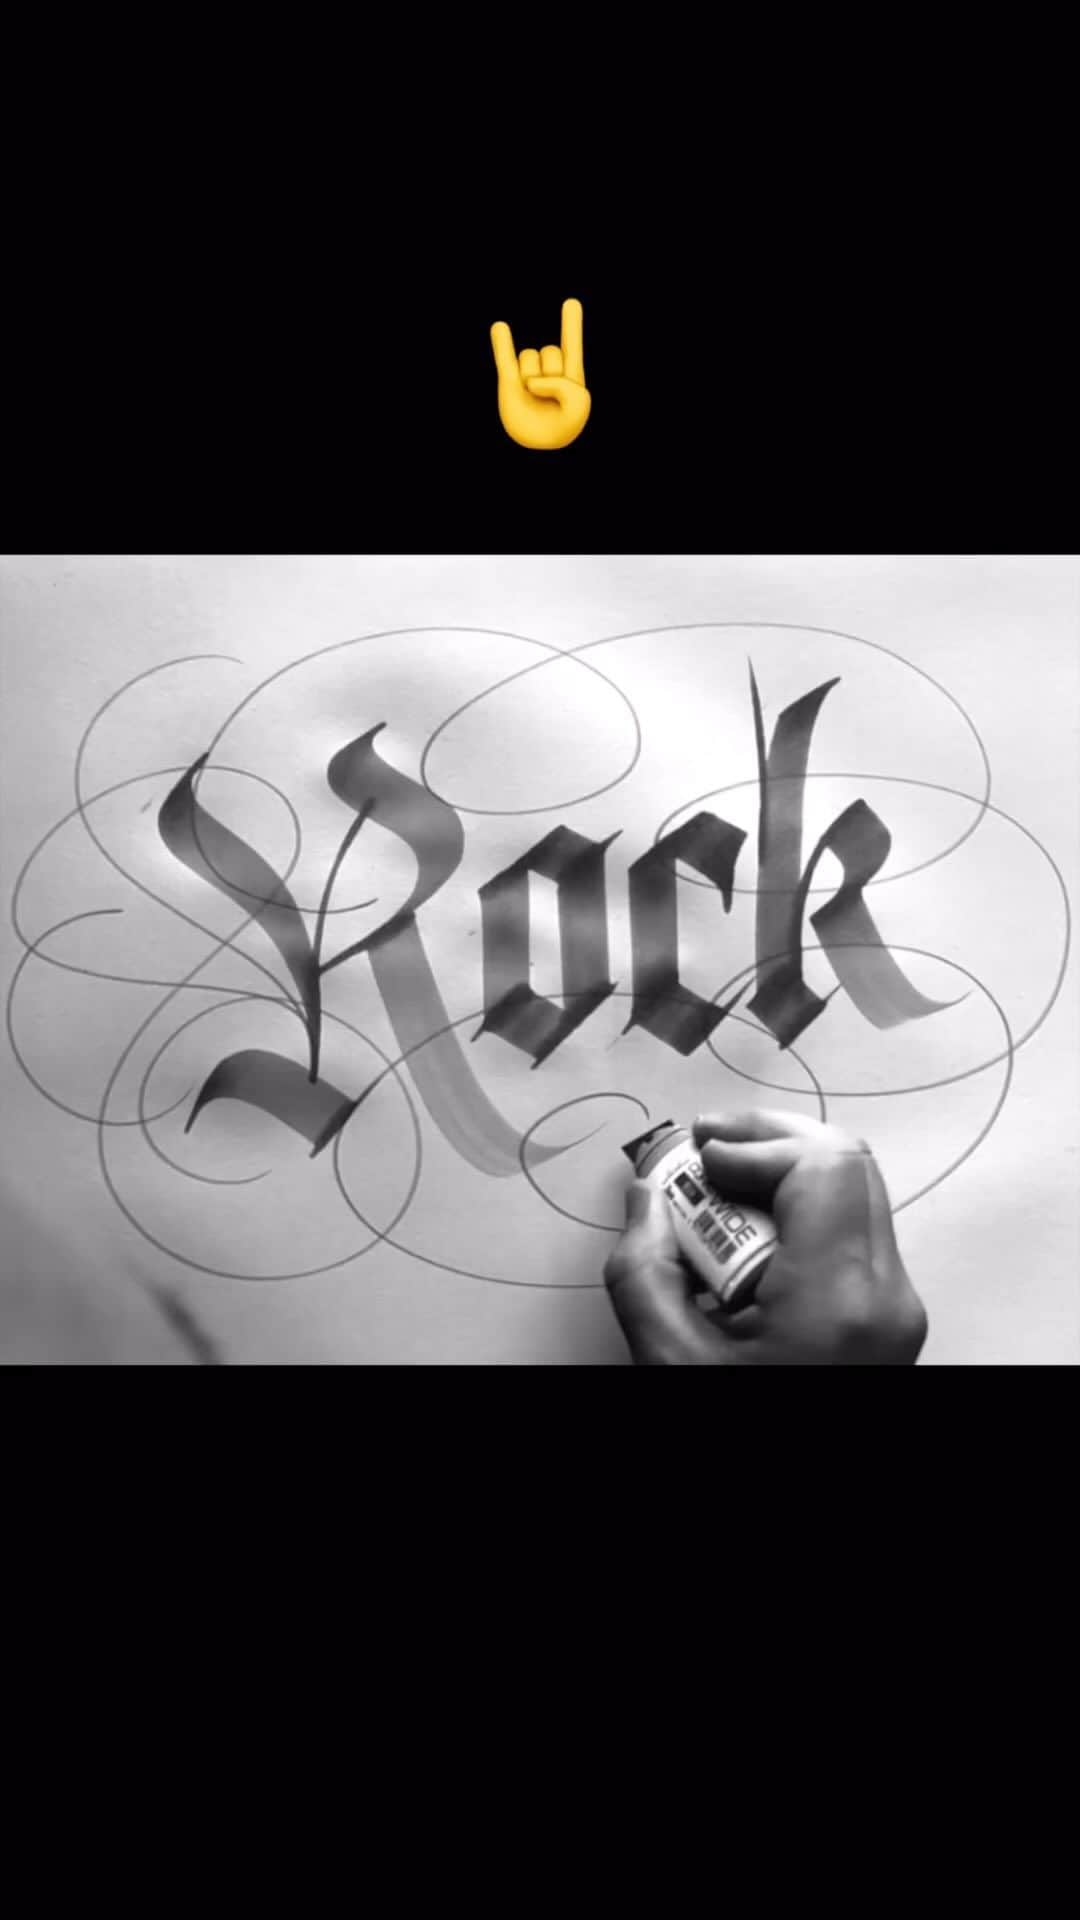 Seb Lesterのインスタグラム：「This went crazy as an asmr Story, so sharing here. Flourished Blackletter Calligraphy using a Copic Wide Marker.#asmr #RockOn #Calligraphy #Gothic #Flourishing #Lettering #seblester #art #artist #heavymetal」